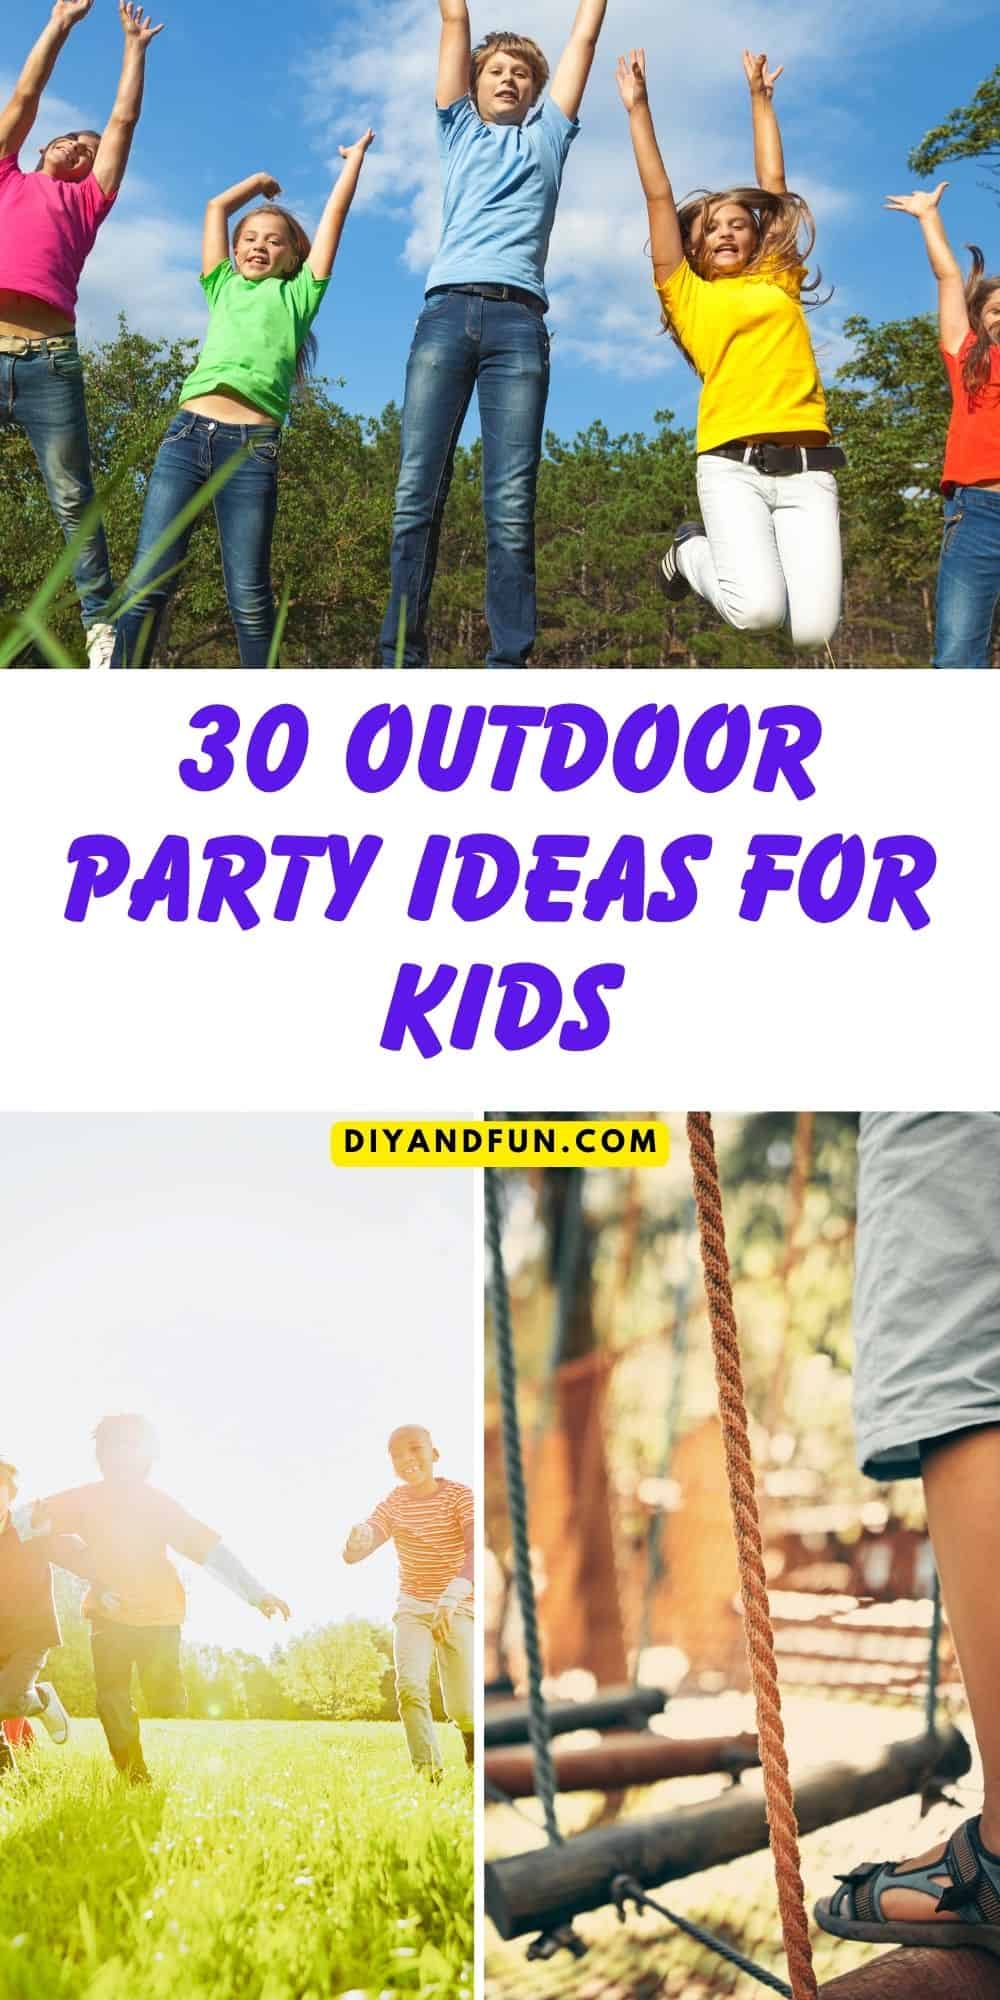 30 Outdoor Party Ideas for Kids, a simple guide for birthday and other gatherings  for children including food and activities. ideas 